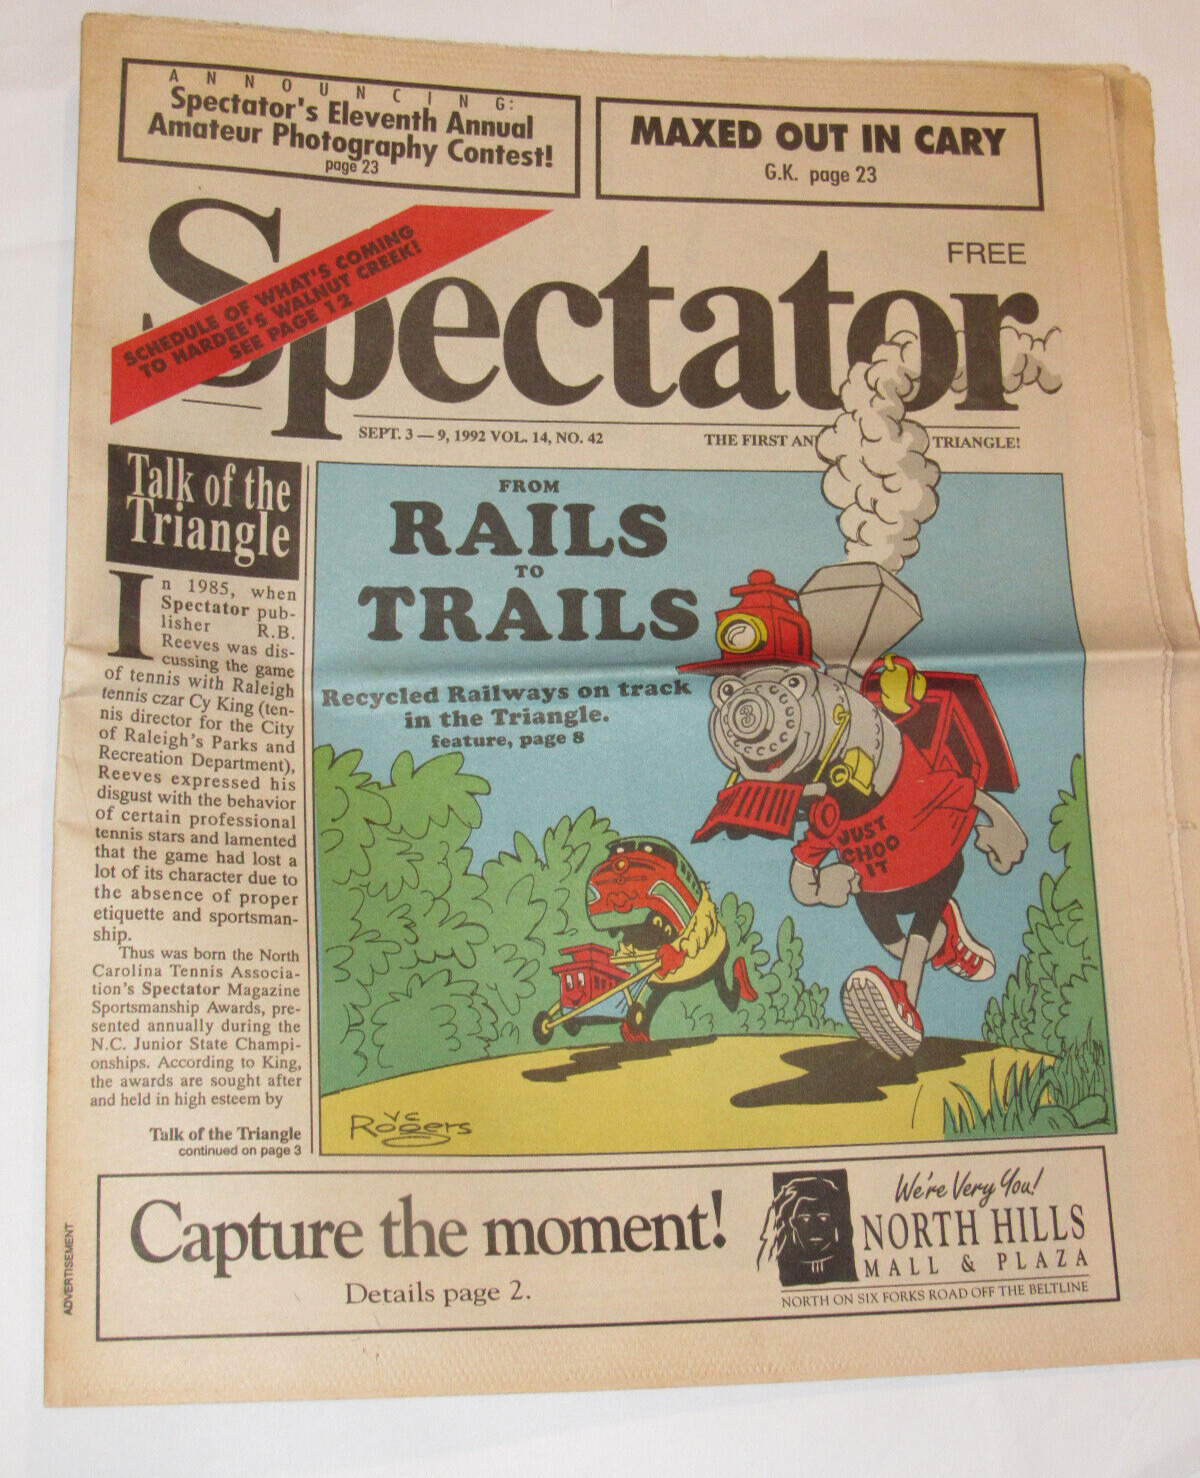 VINTAGE 1992 RESEARCH TRIANGLE PARK, NC 'SPECTATOR' NEWSPAPER RAIL TRAILS ISSUE